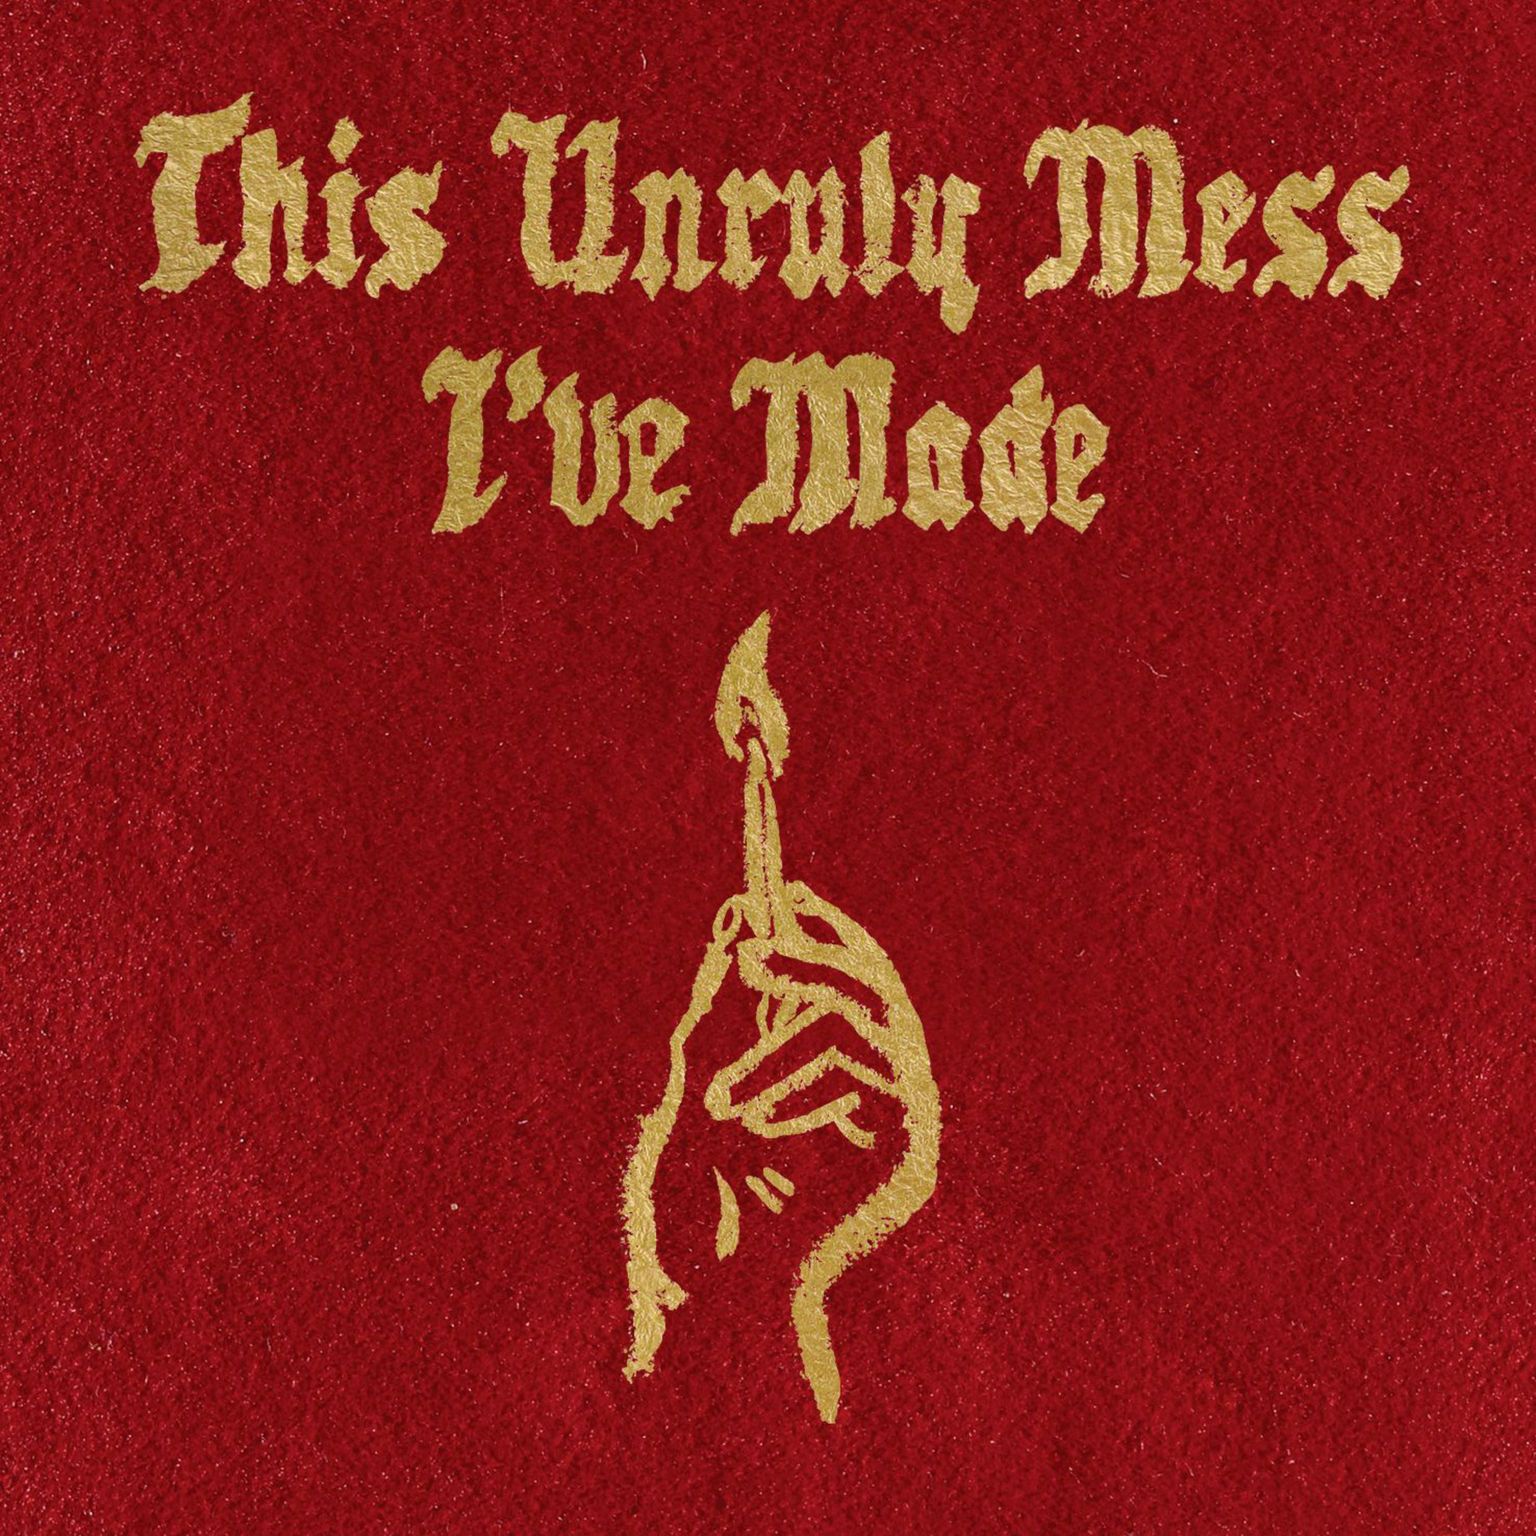 Macklemore & Ryan Lewis - This Unruly Mess I’ve Made